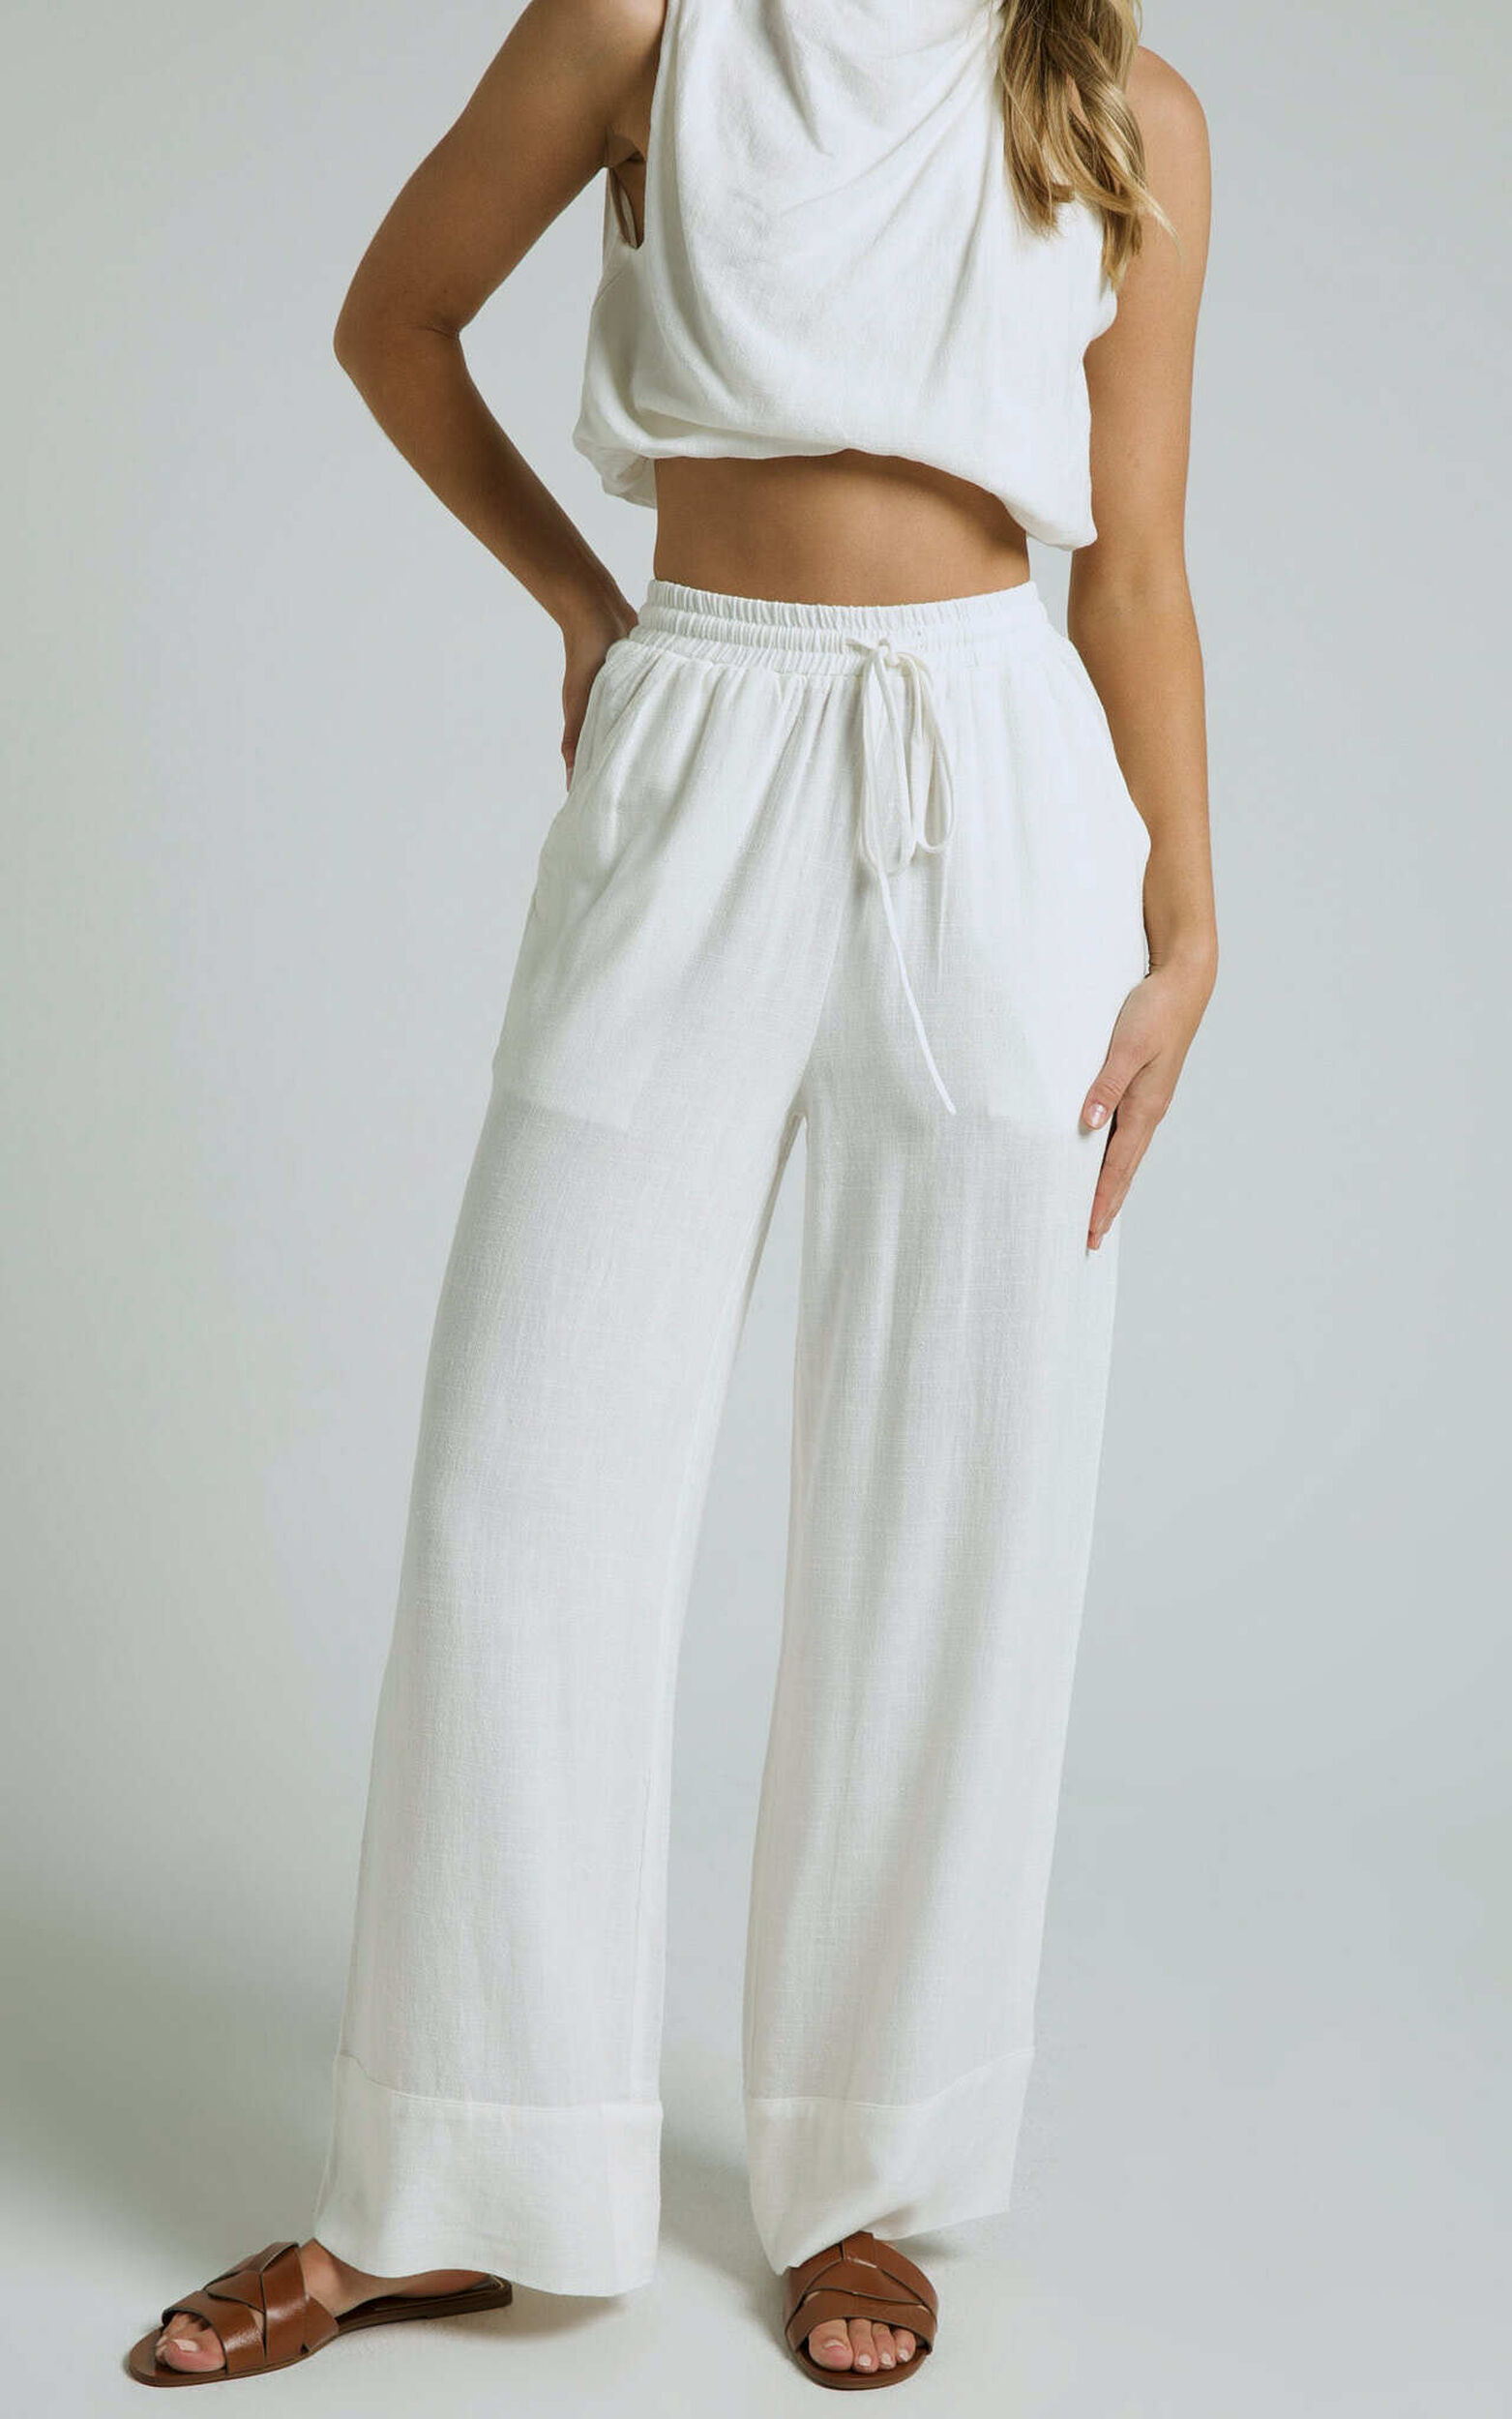 Adalila Pants - Linen Look Wide Leg Relaxed Pants in White - 06, WHT1